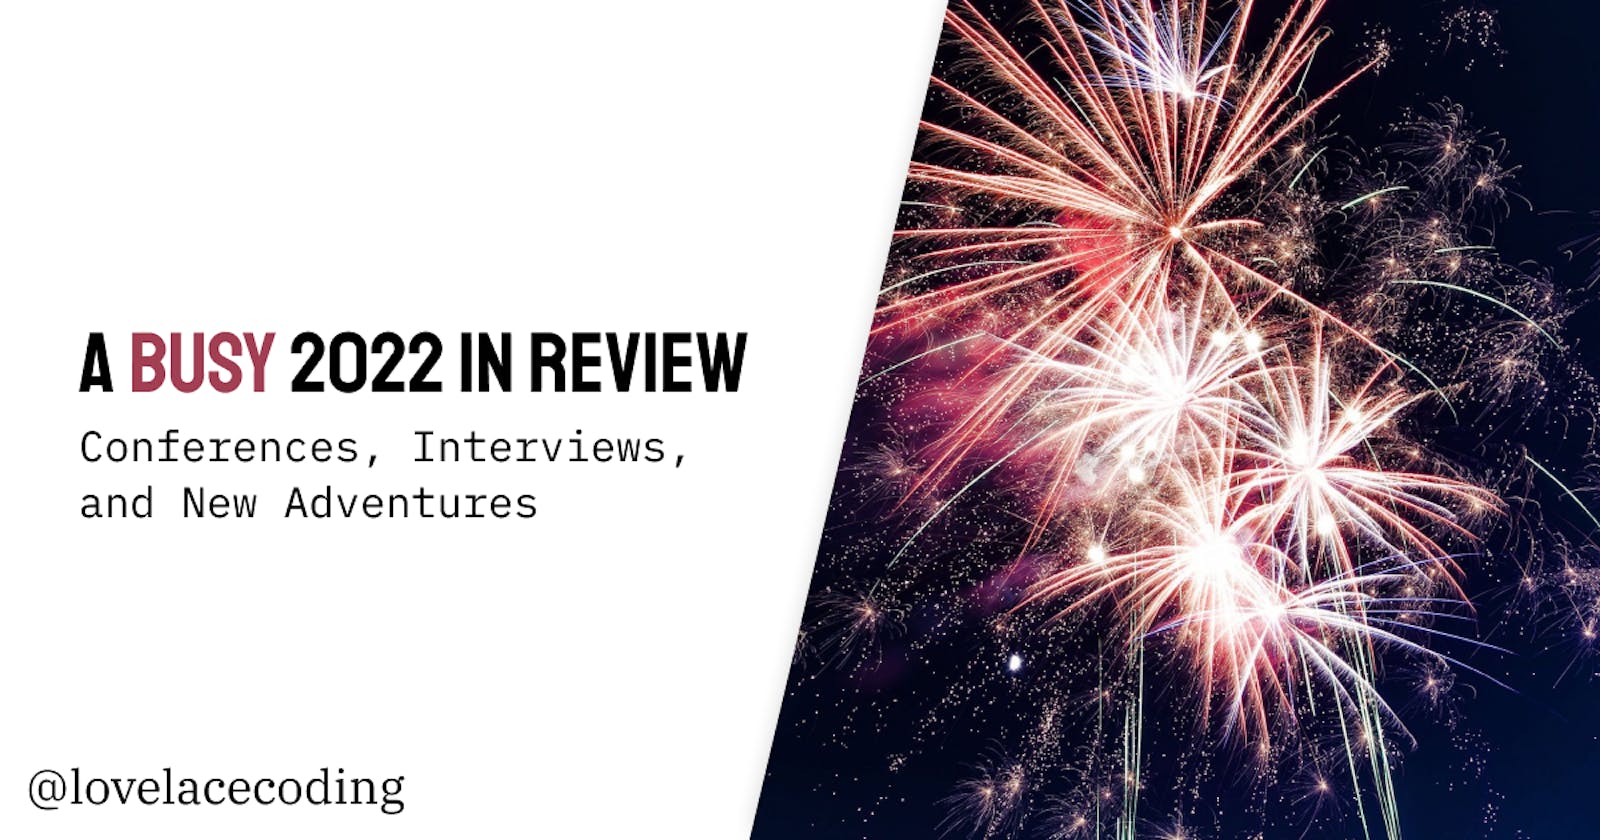 A Busy 2022 in Review: Conferences, Interviews, and New Adventures